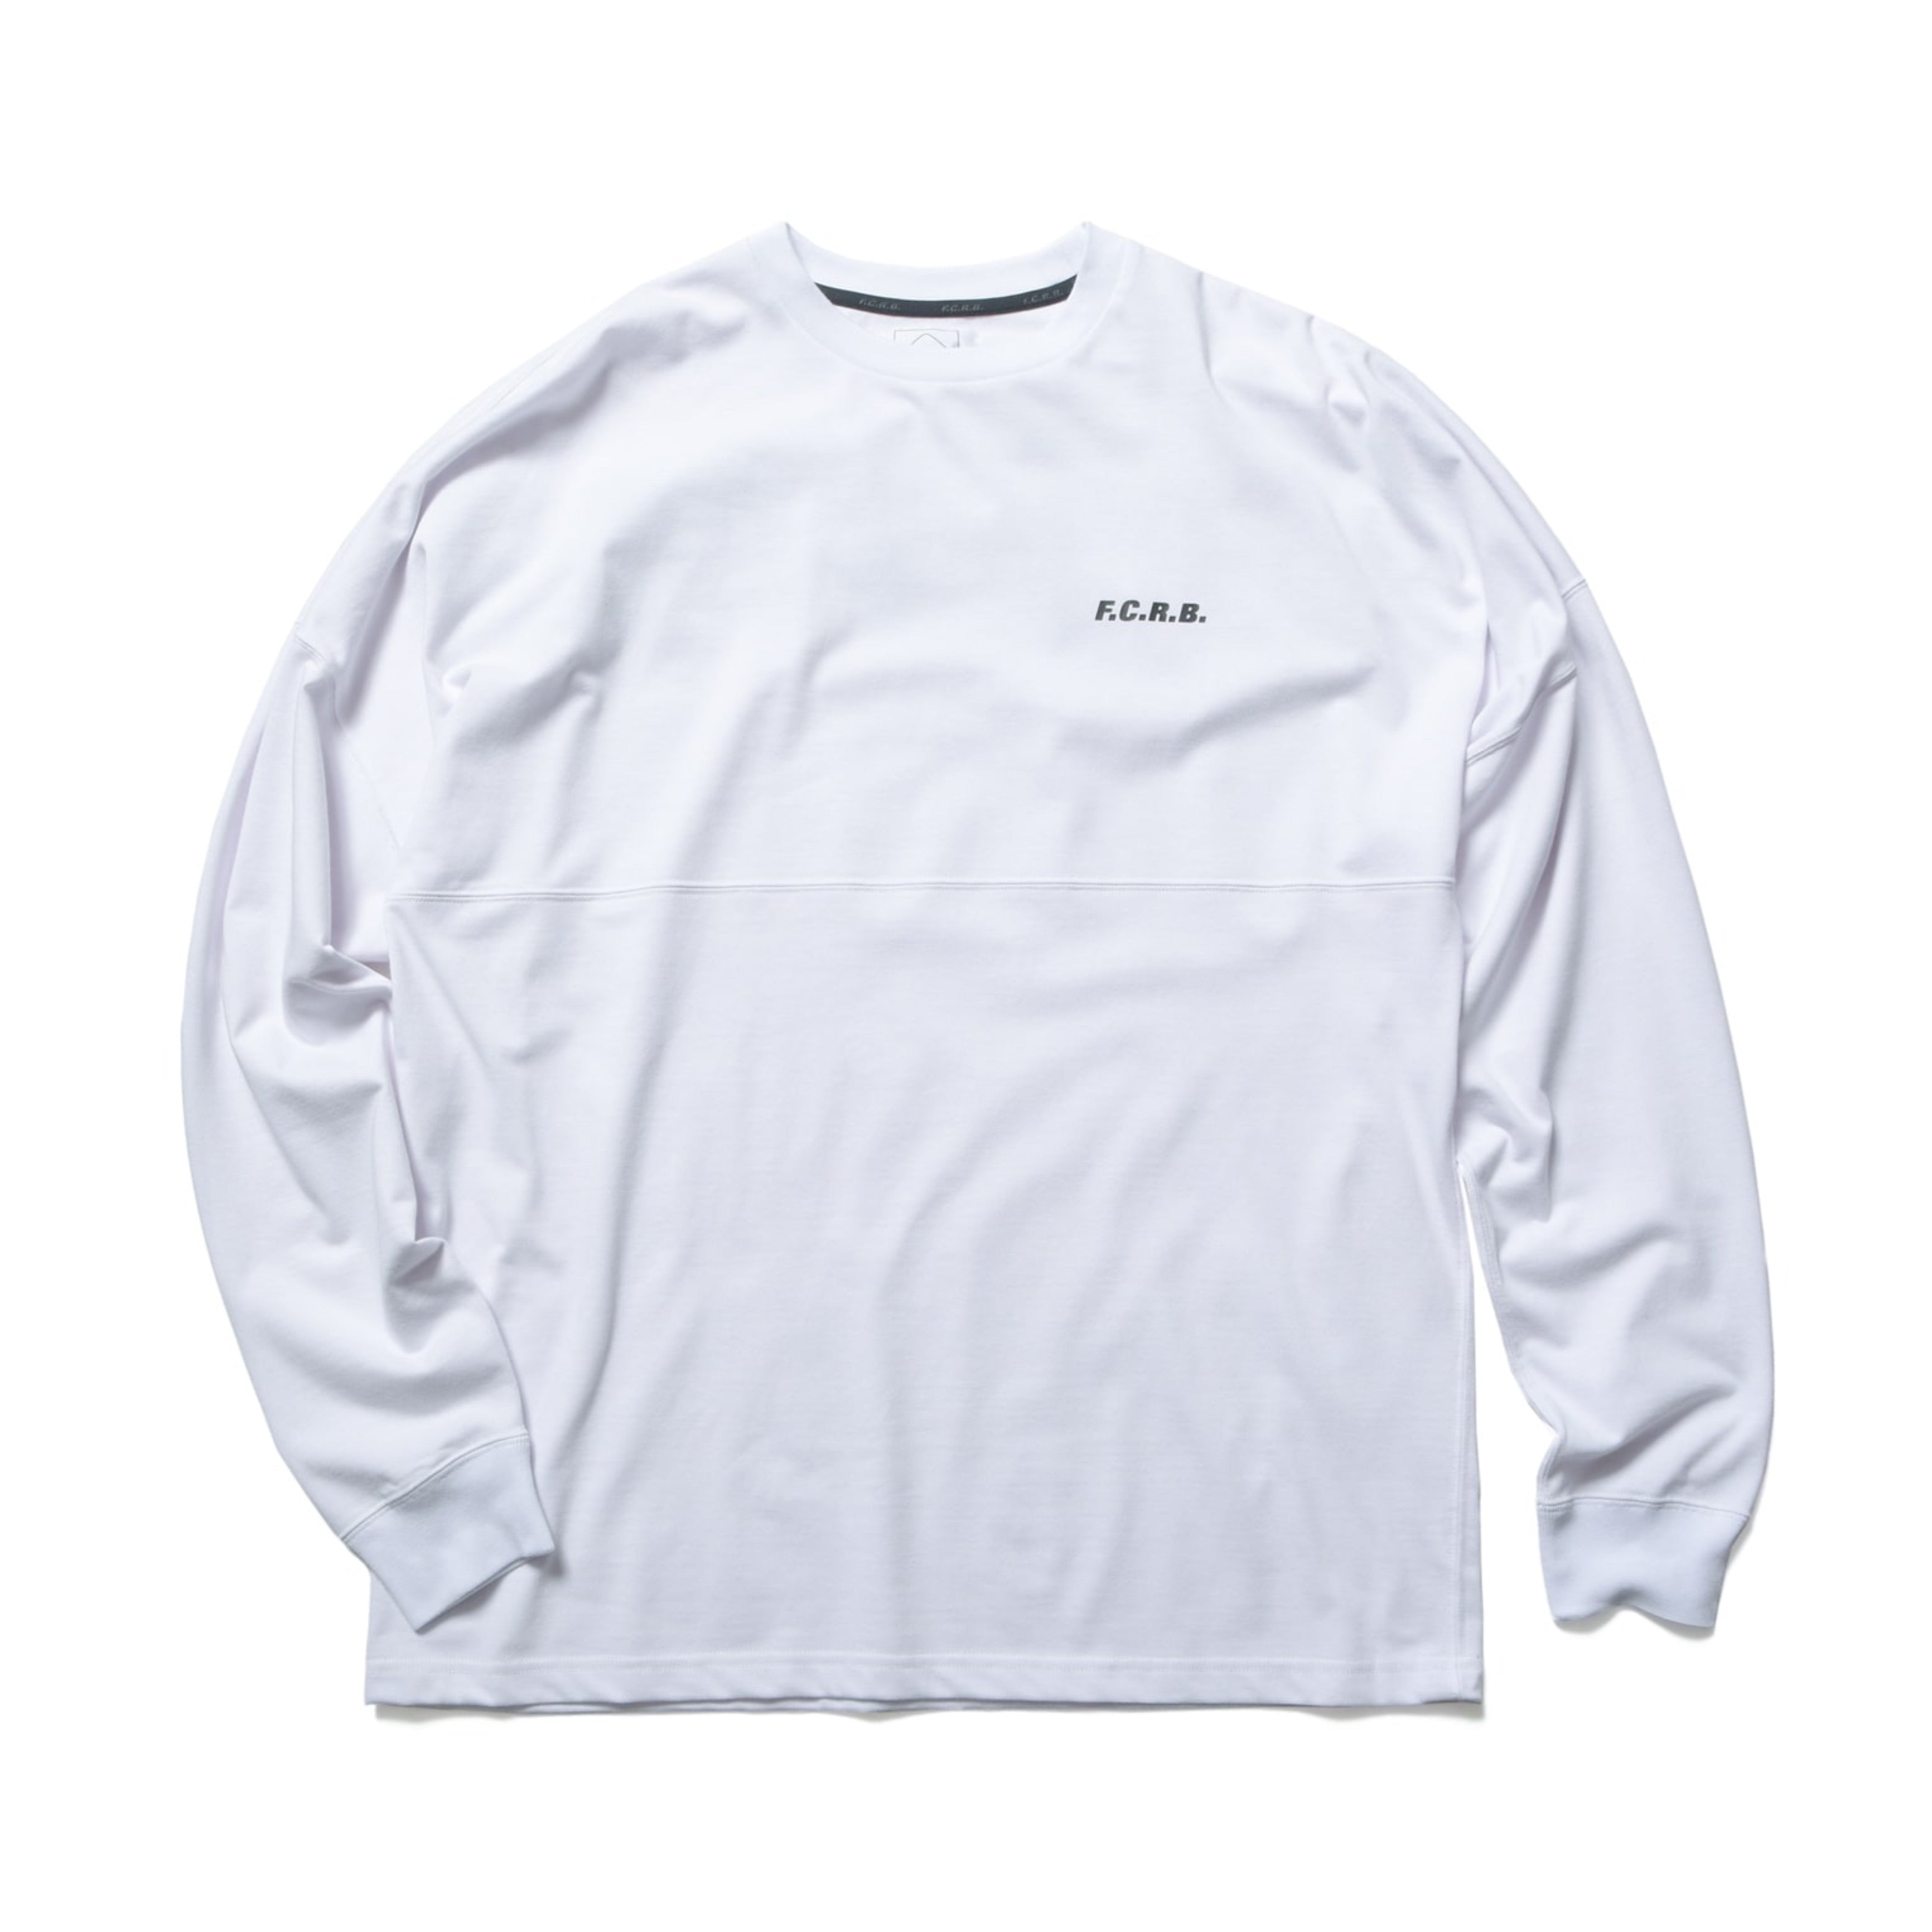 STAR BIG LOGO L/S TEAM BAGGY TEE – TIME AFTER TIME